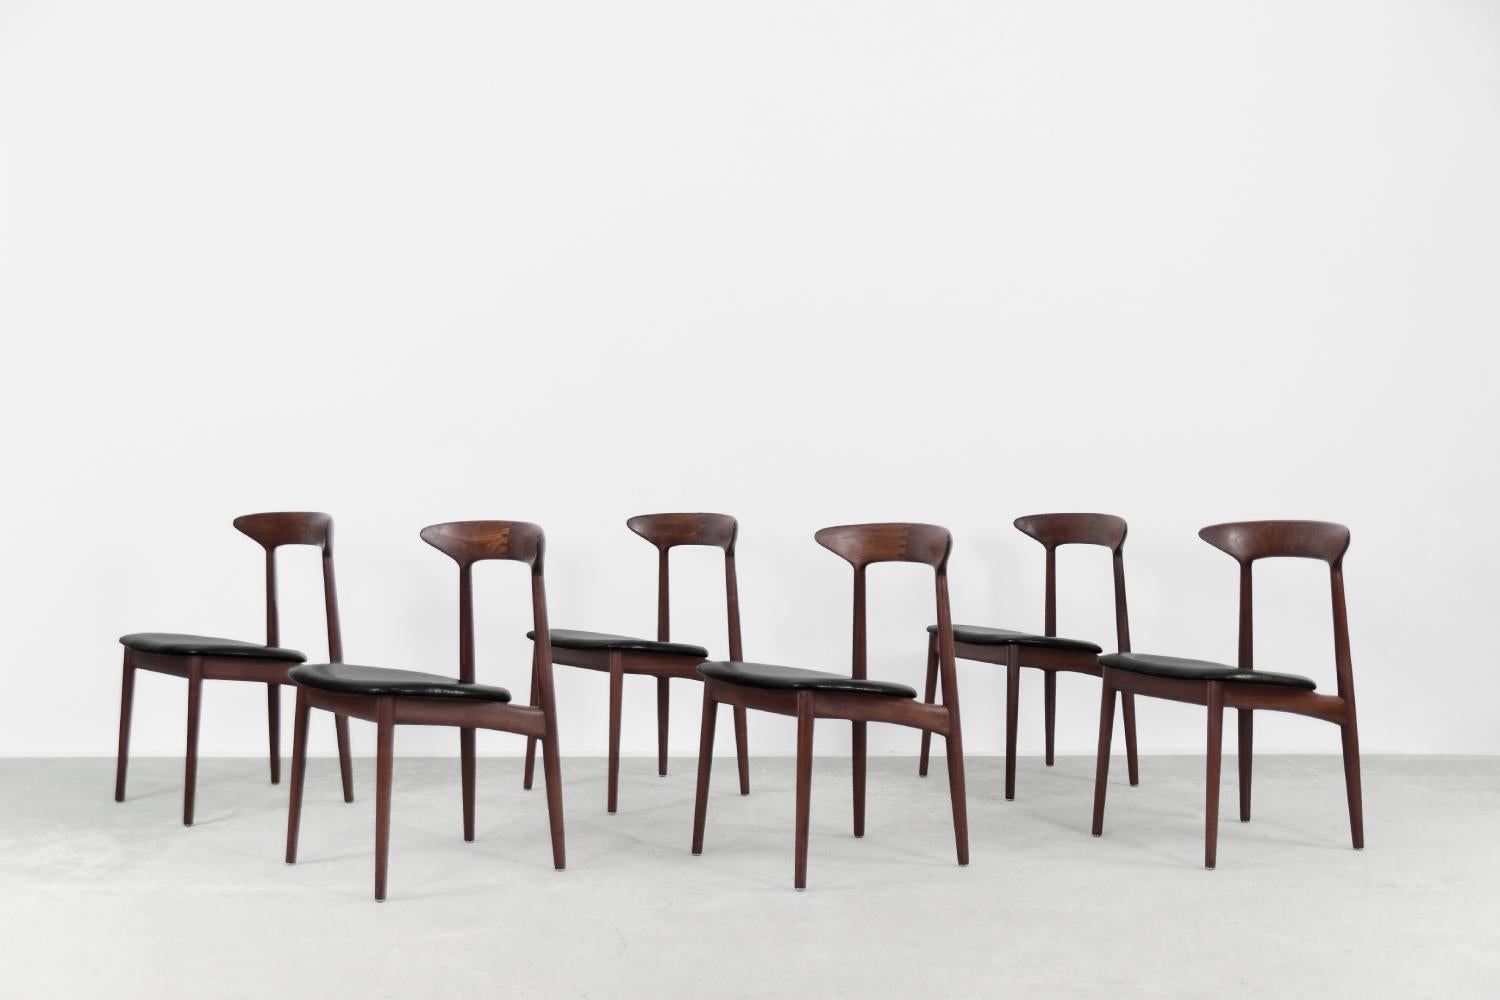 This set of six modernist dinning chairs was created by Danish designer Kurt Østervig during the 1960s. The chairs were made of solid teak, with a visible structure and grain. This model represents the old school of craftsmanship. Noteworthy is the